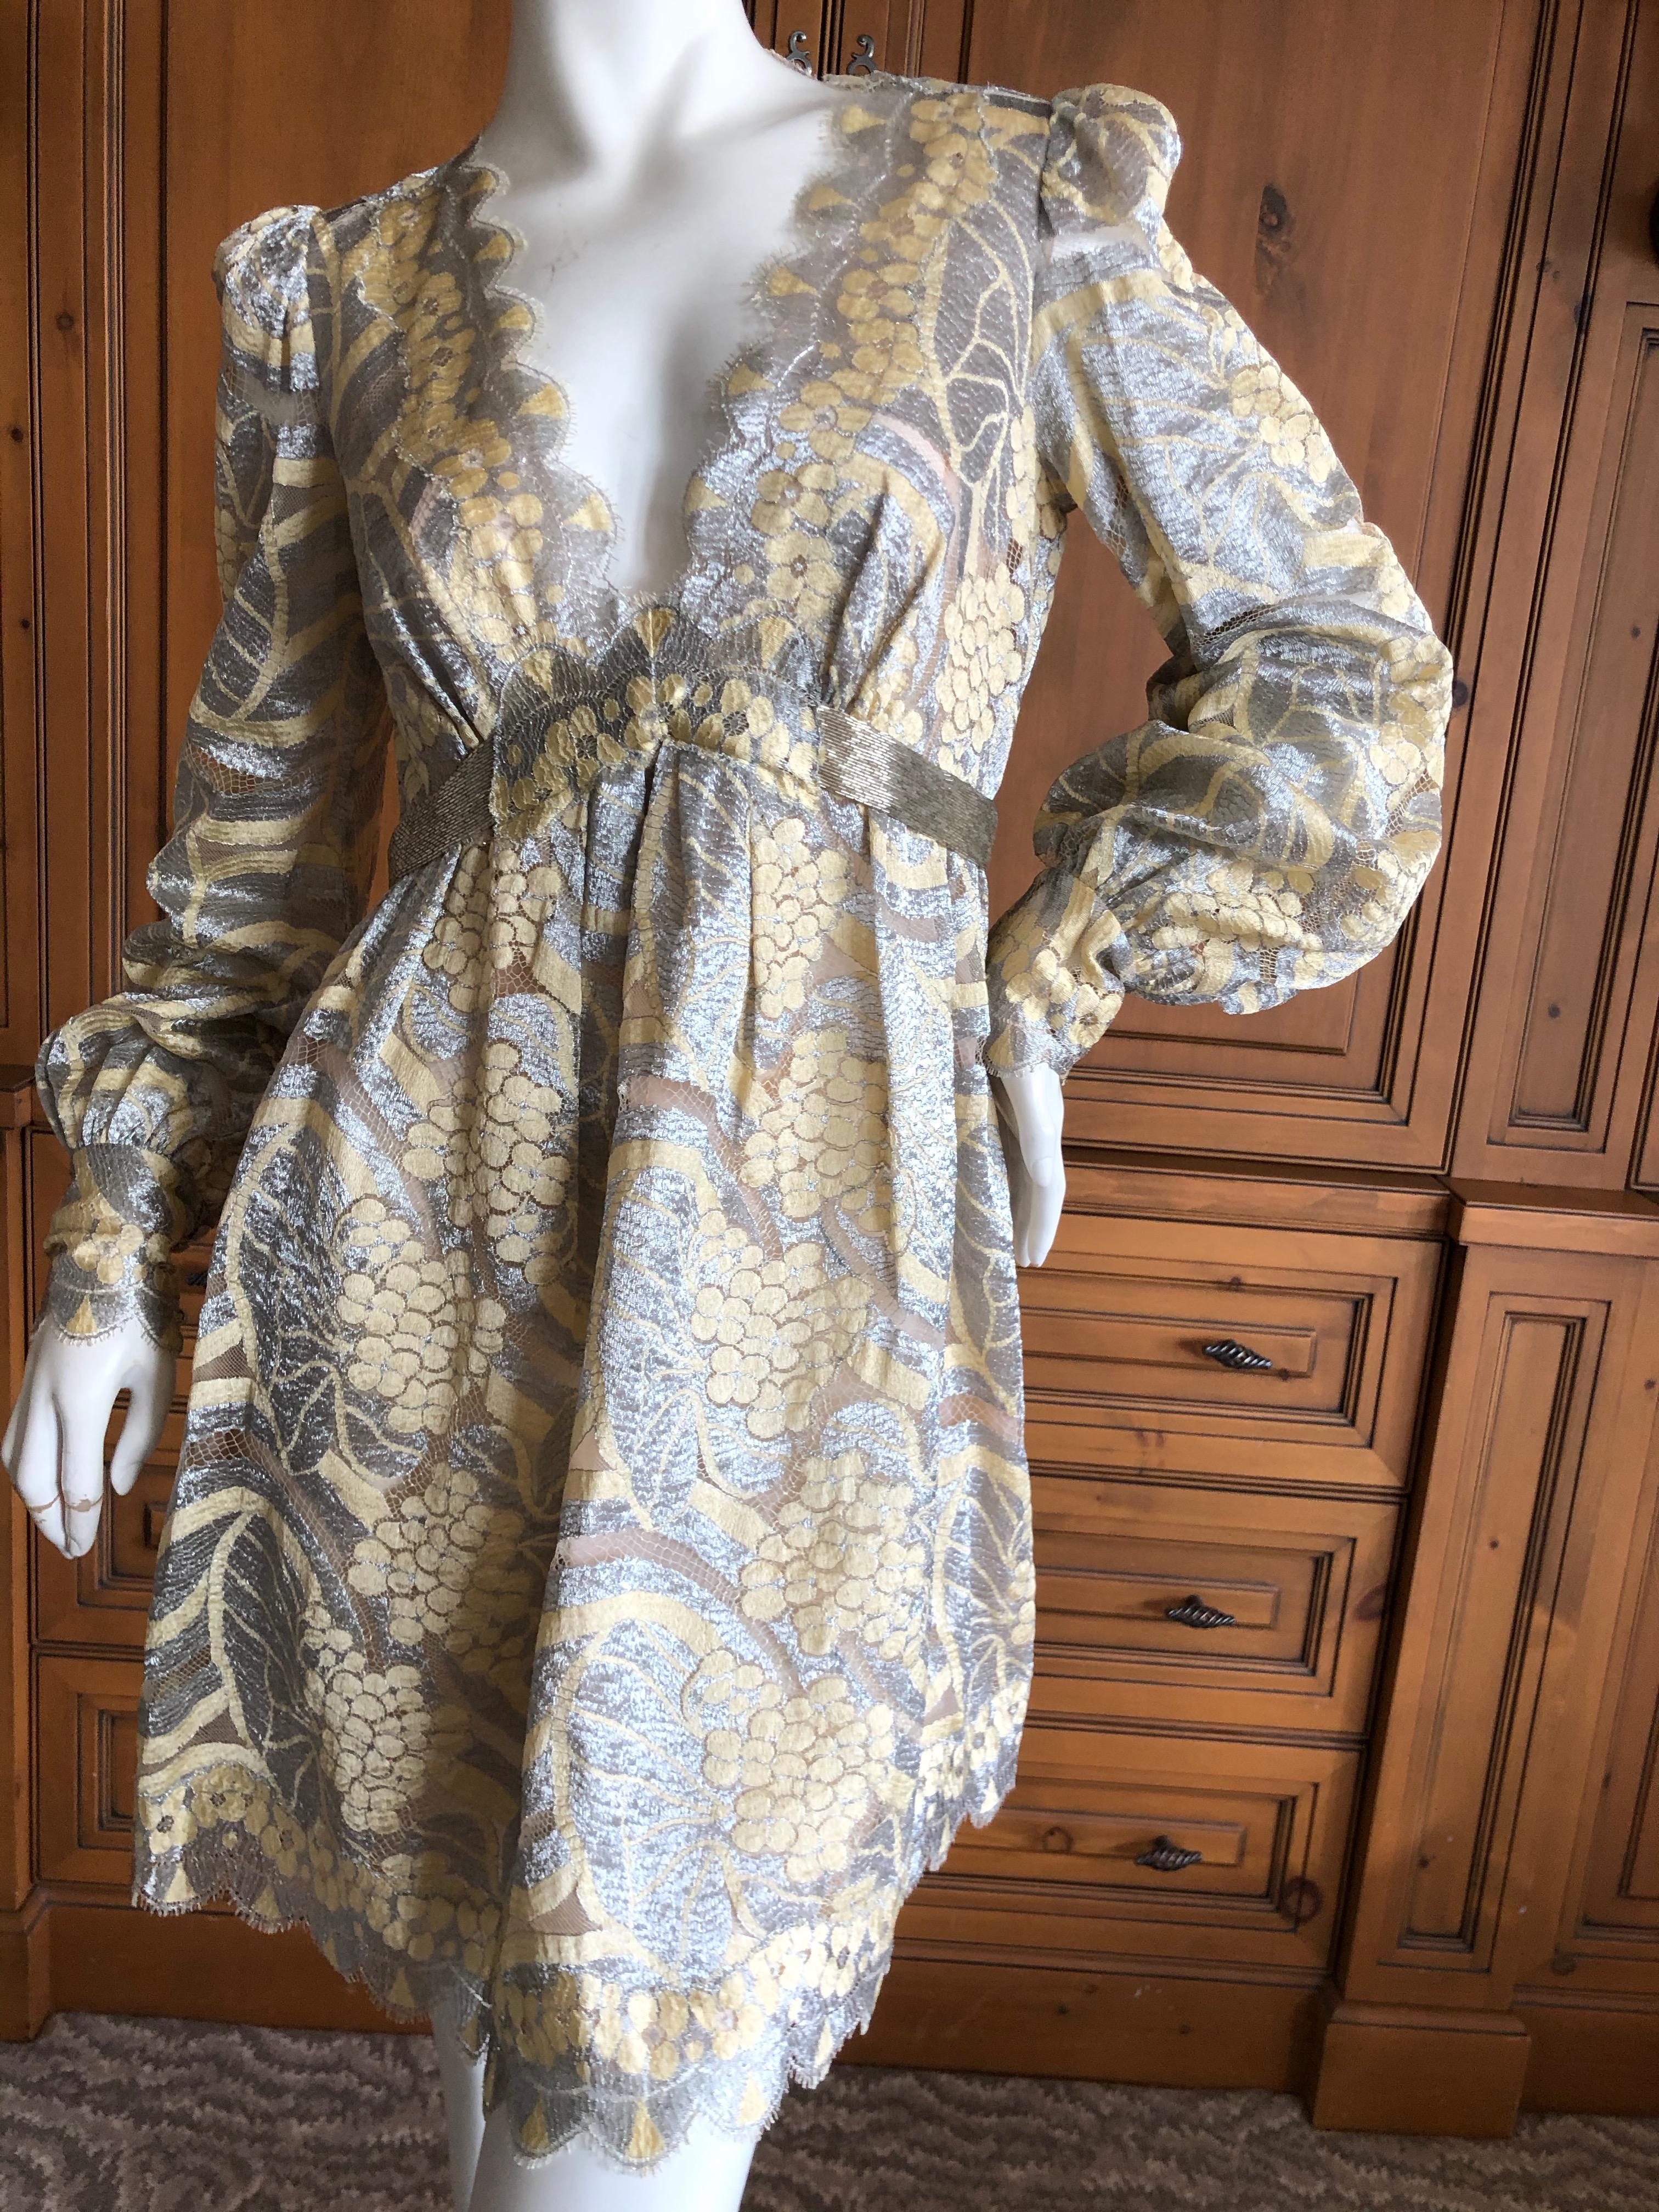 Marc Jacobs Elegant Vintage Gold & Silver Lace Scalloped Dress w Bugle Bead Belt In Excellent Condition For Sale In Cloverdale, CA